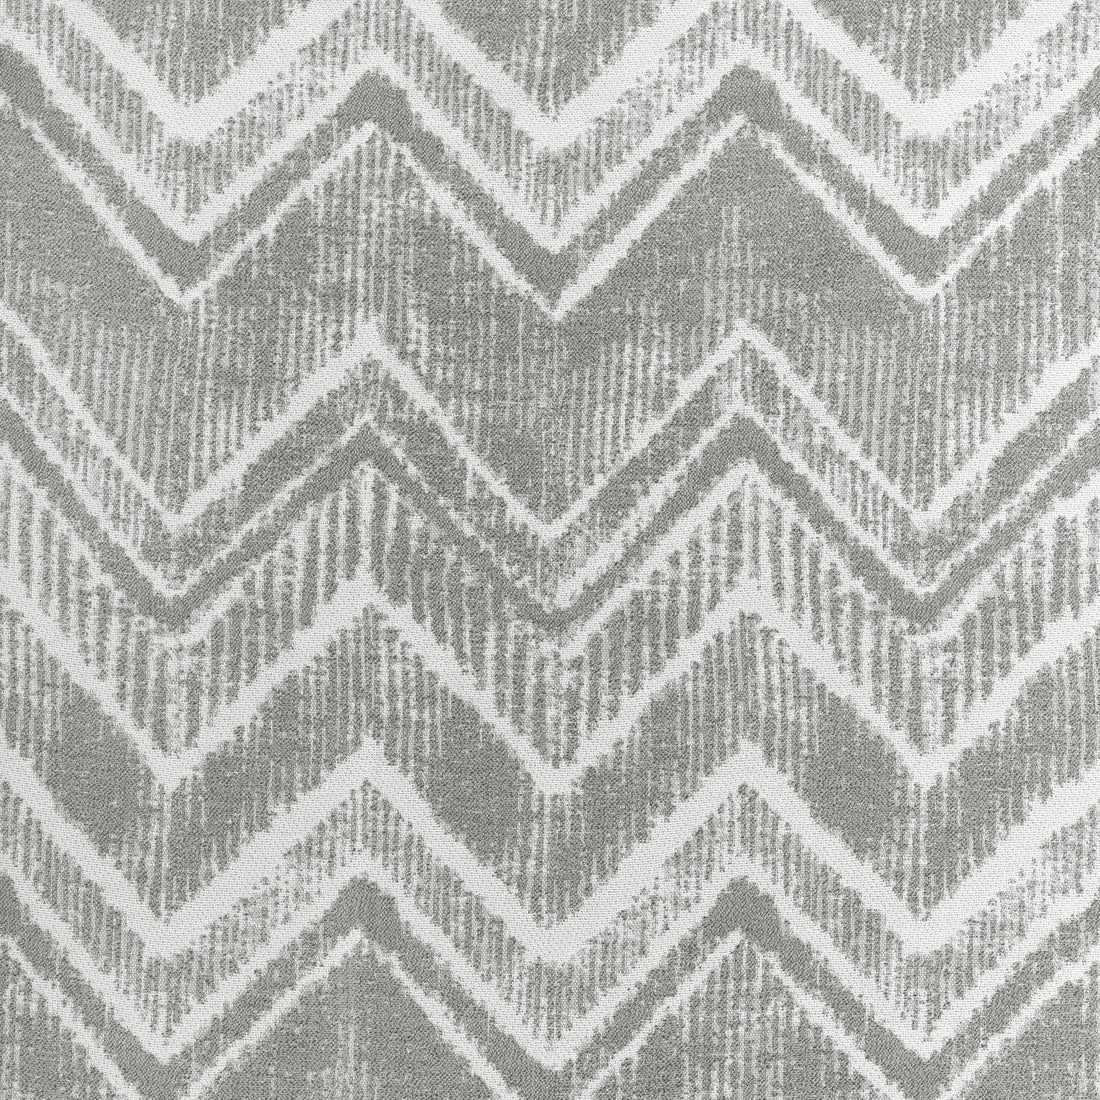 Riviera Batik fabric in driftwood color - pattern 36934.11.0 - by Kravet Couture in the Riviera collection